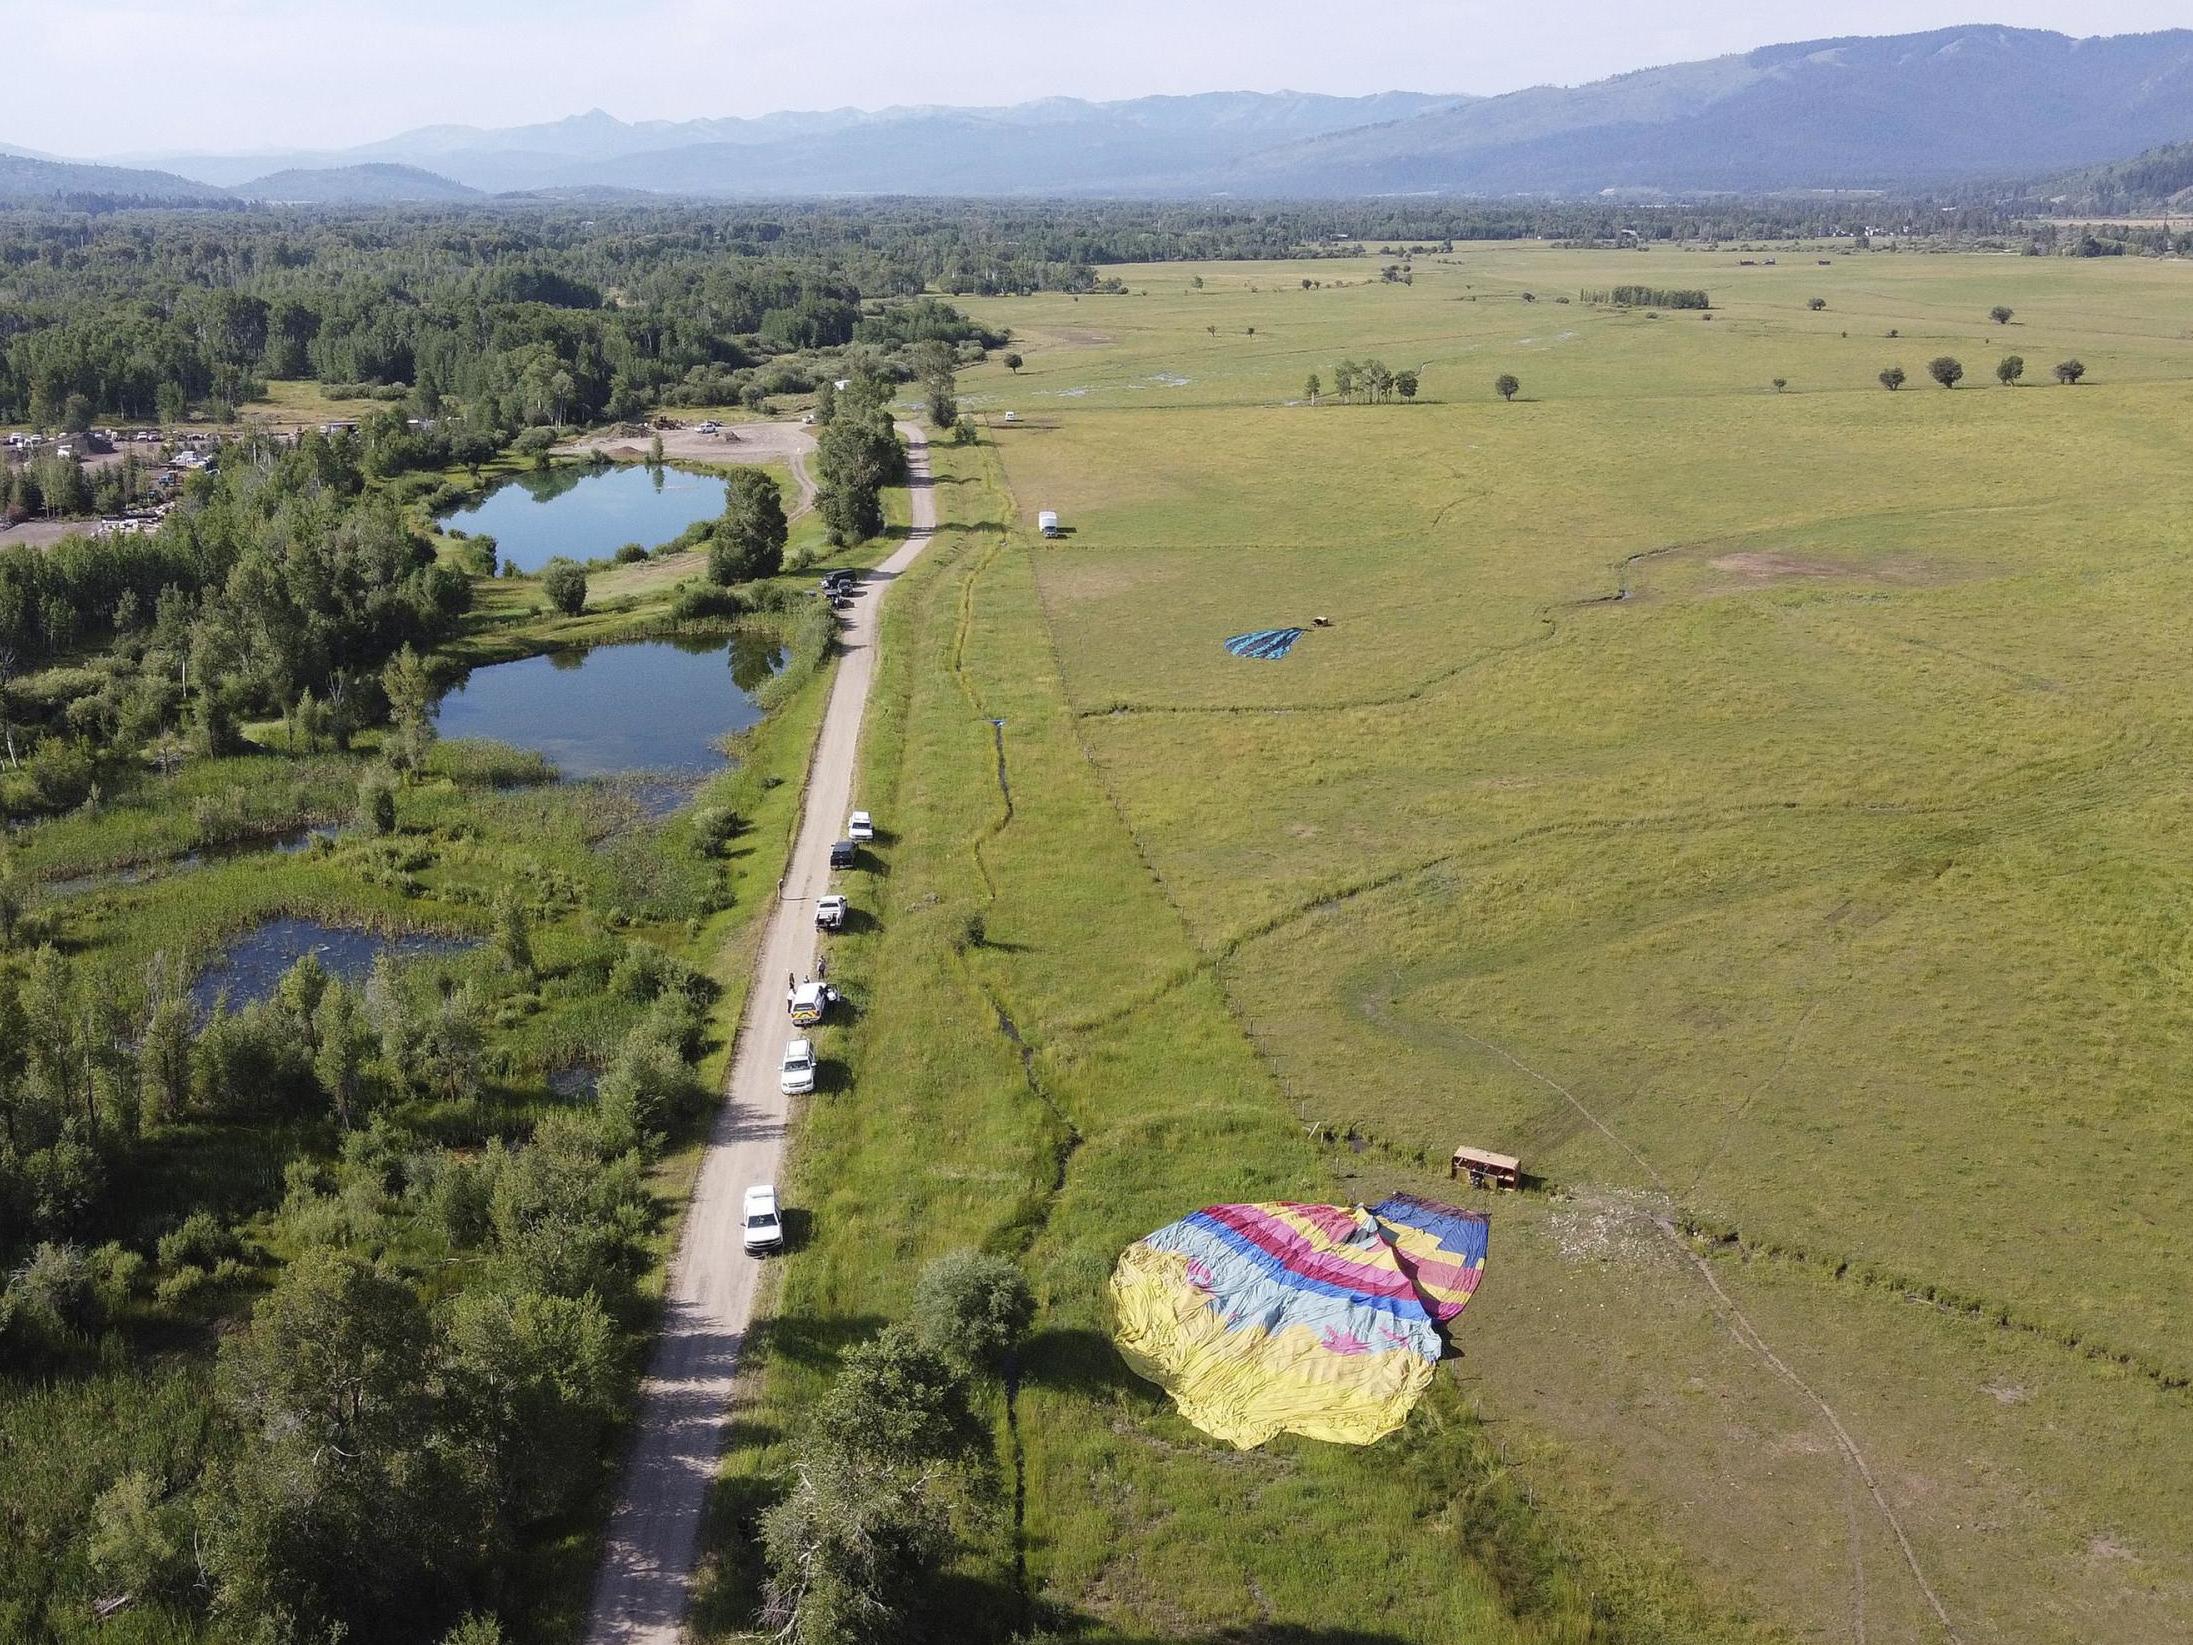 Two of three sightseeing balloons that crashed are seen in an open area of Jackson Hole in western Wyoming. Between 16 and 20 people were hurt, officials said